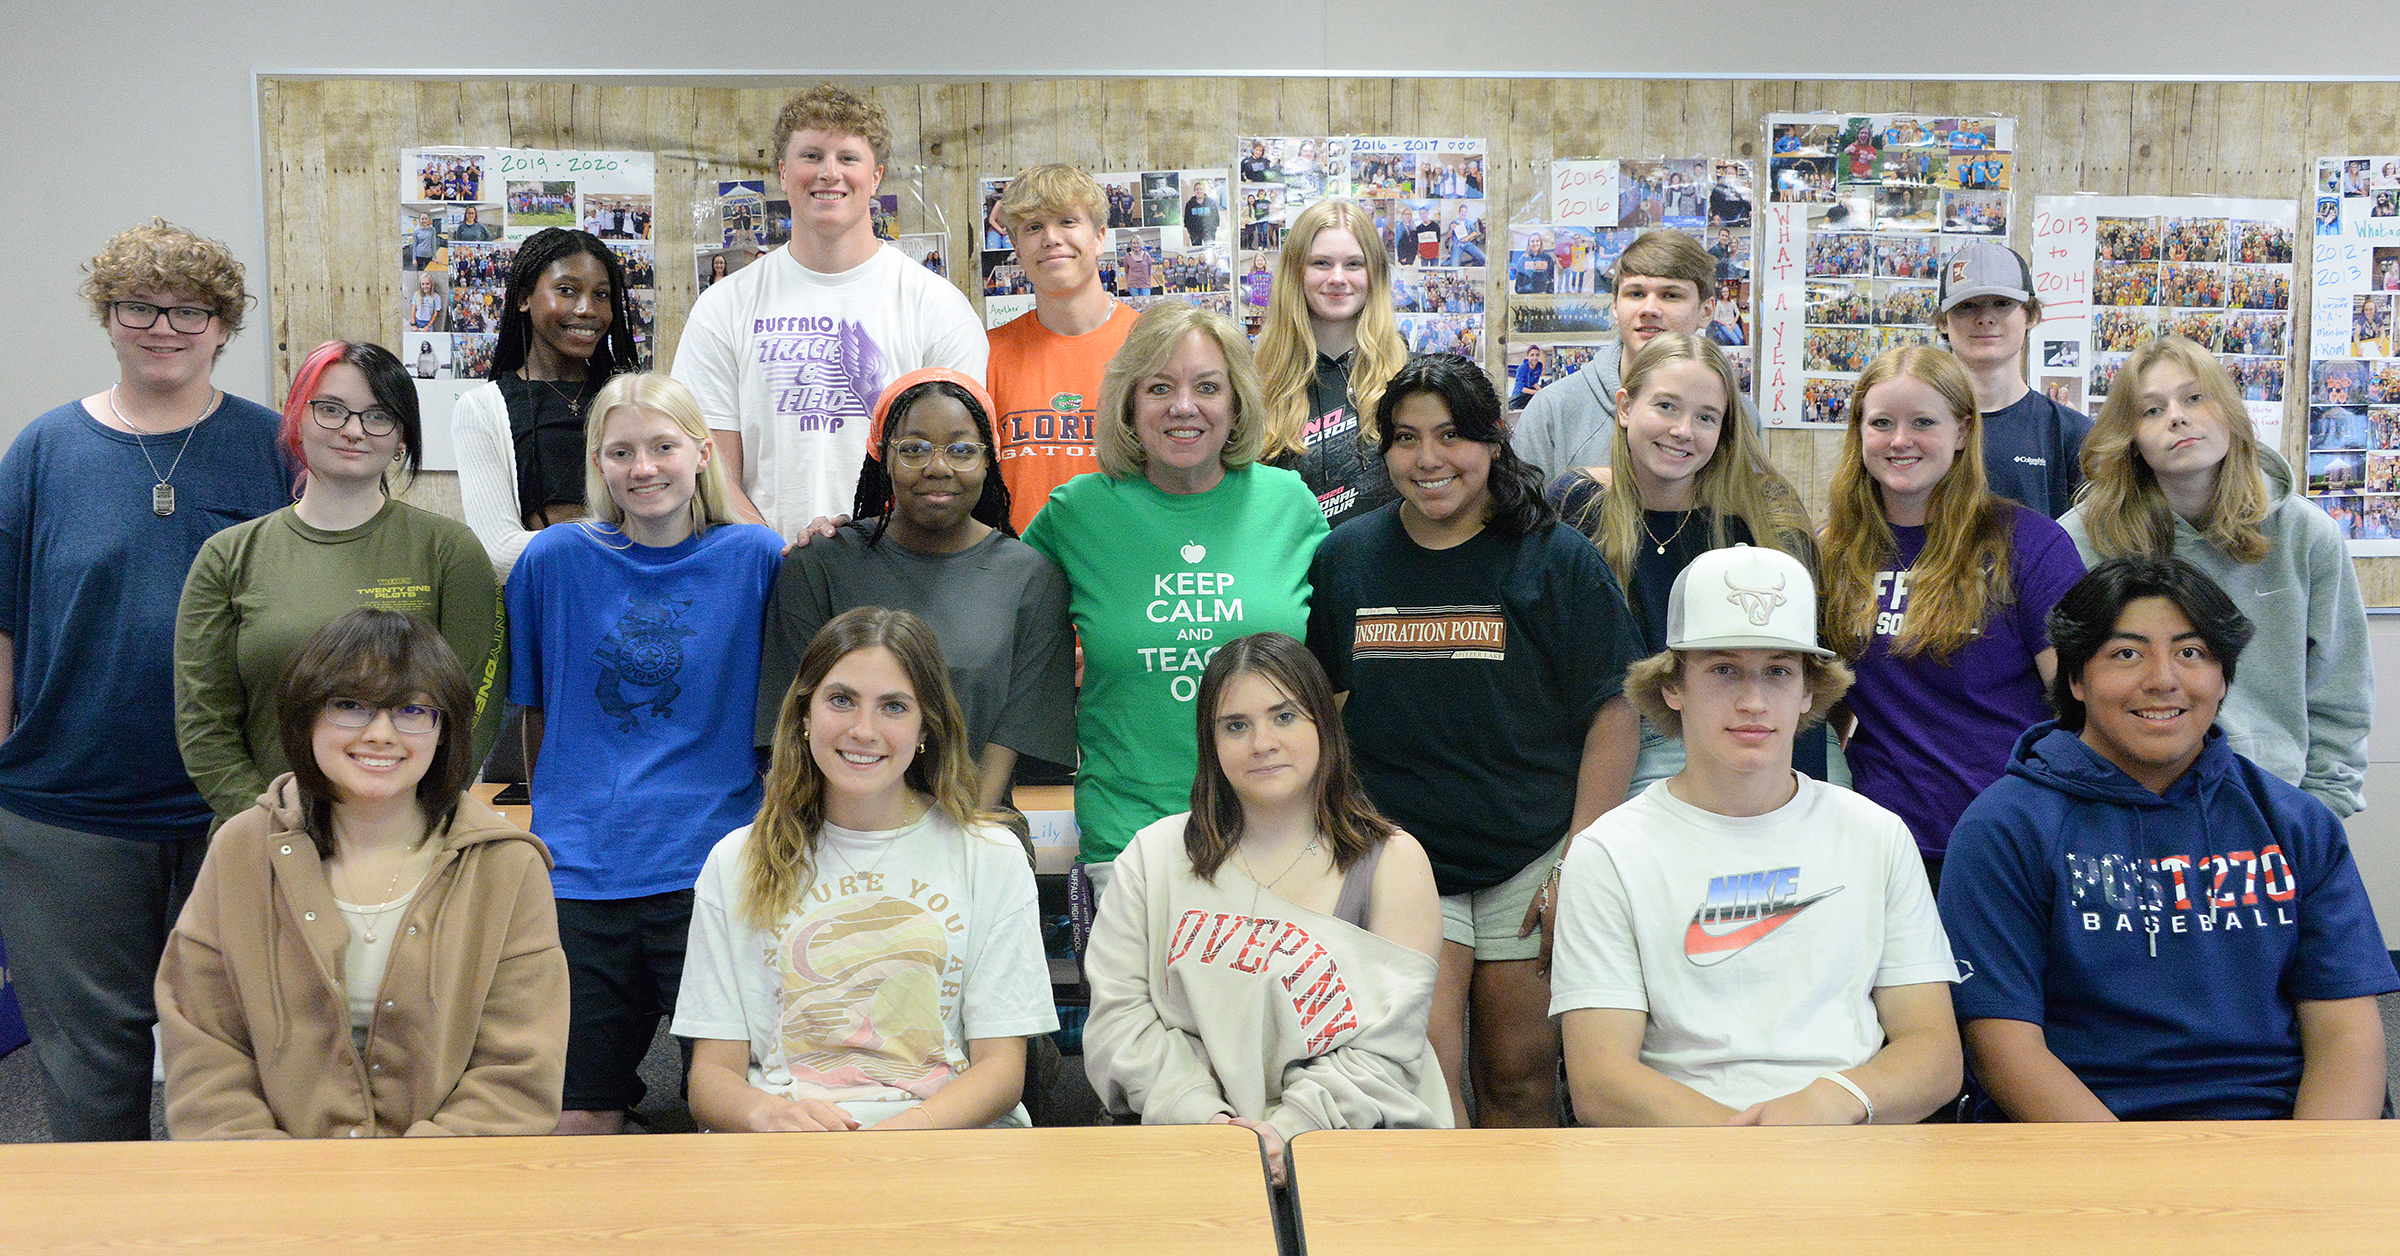 Hulley with her advisory class